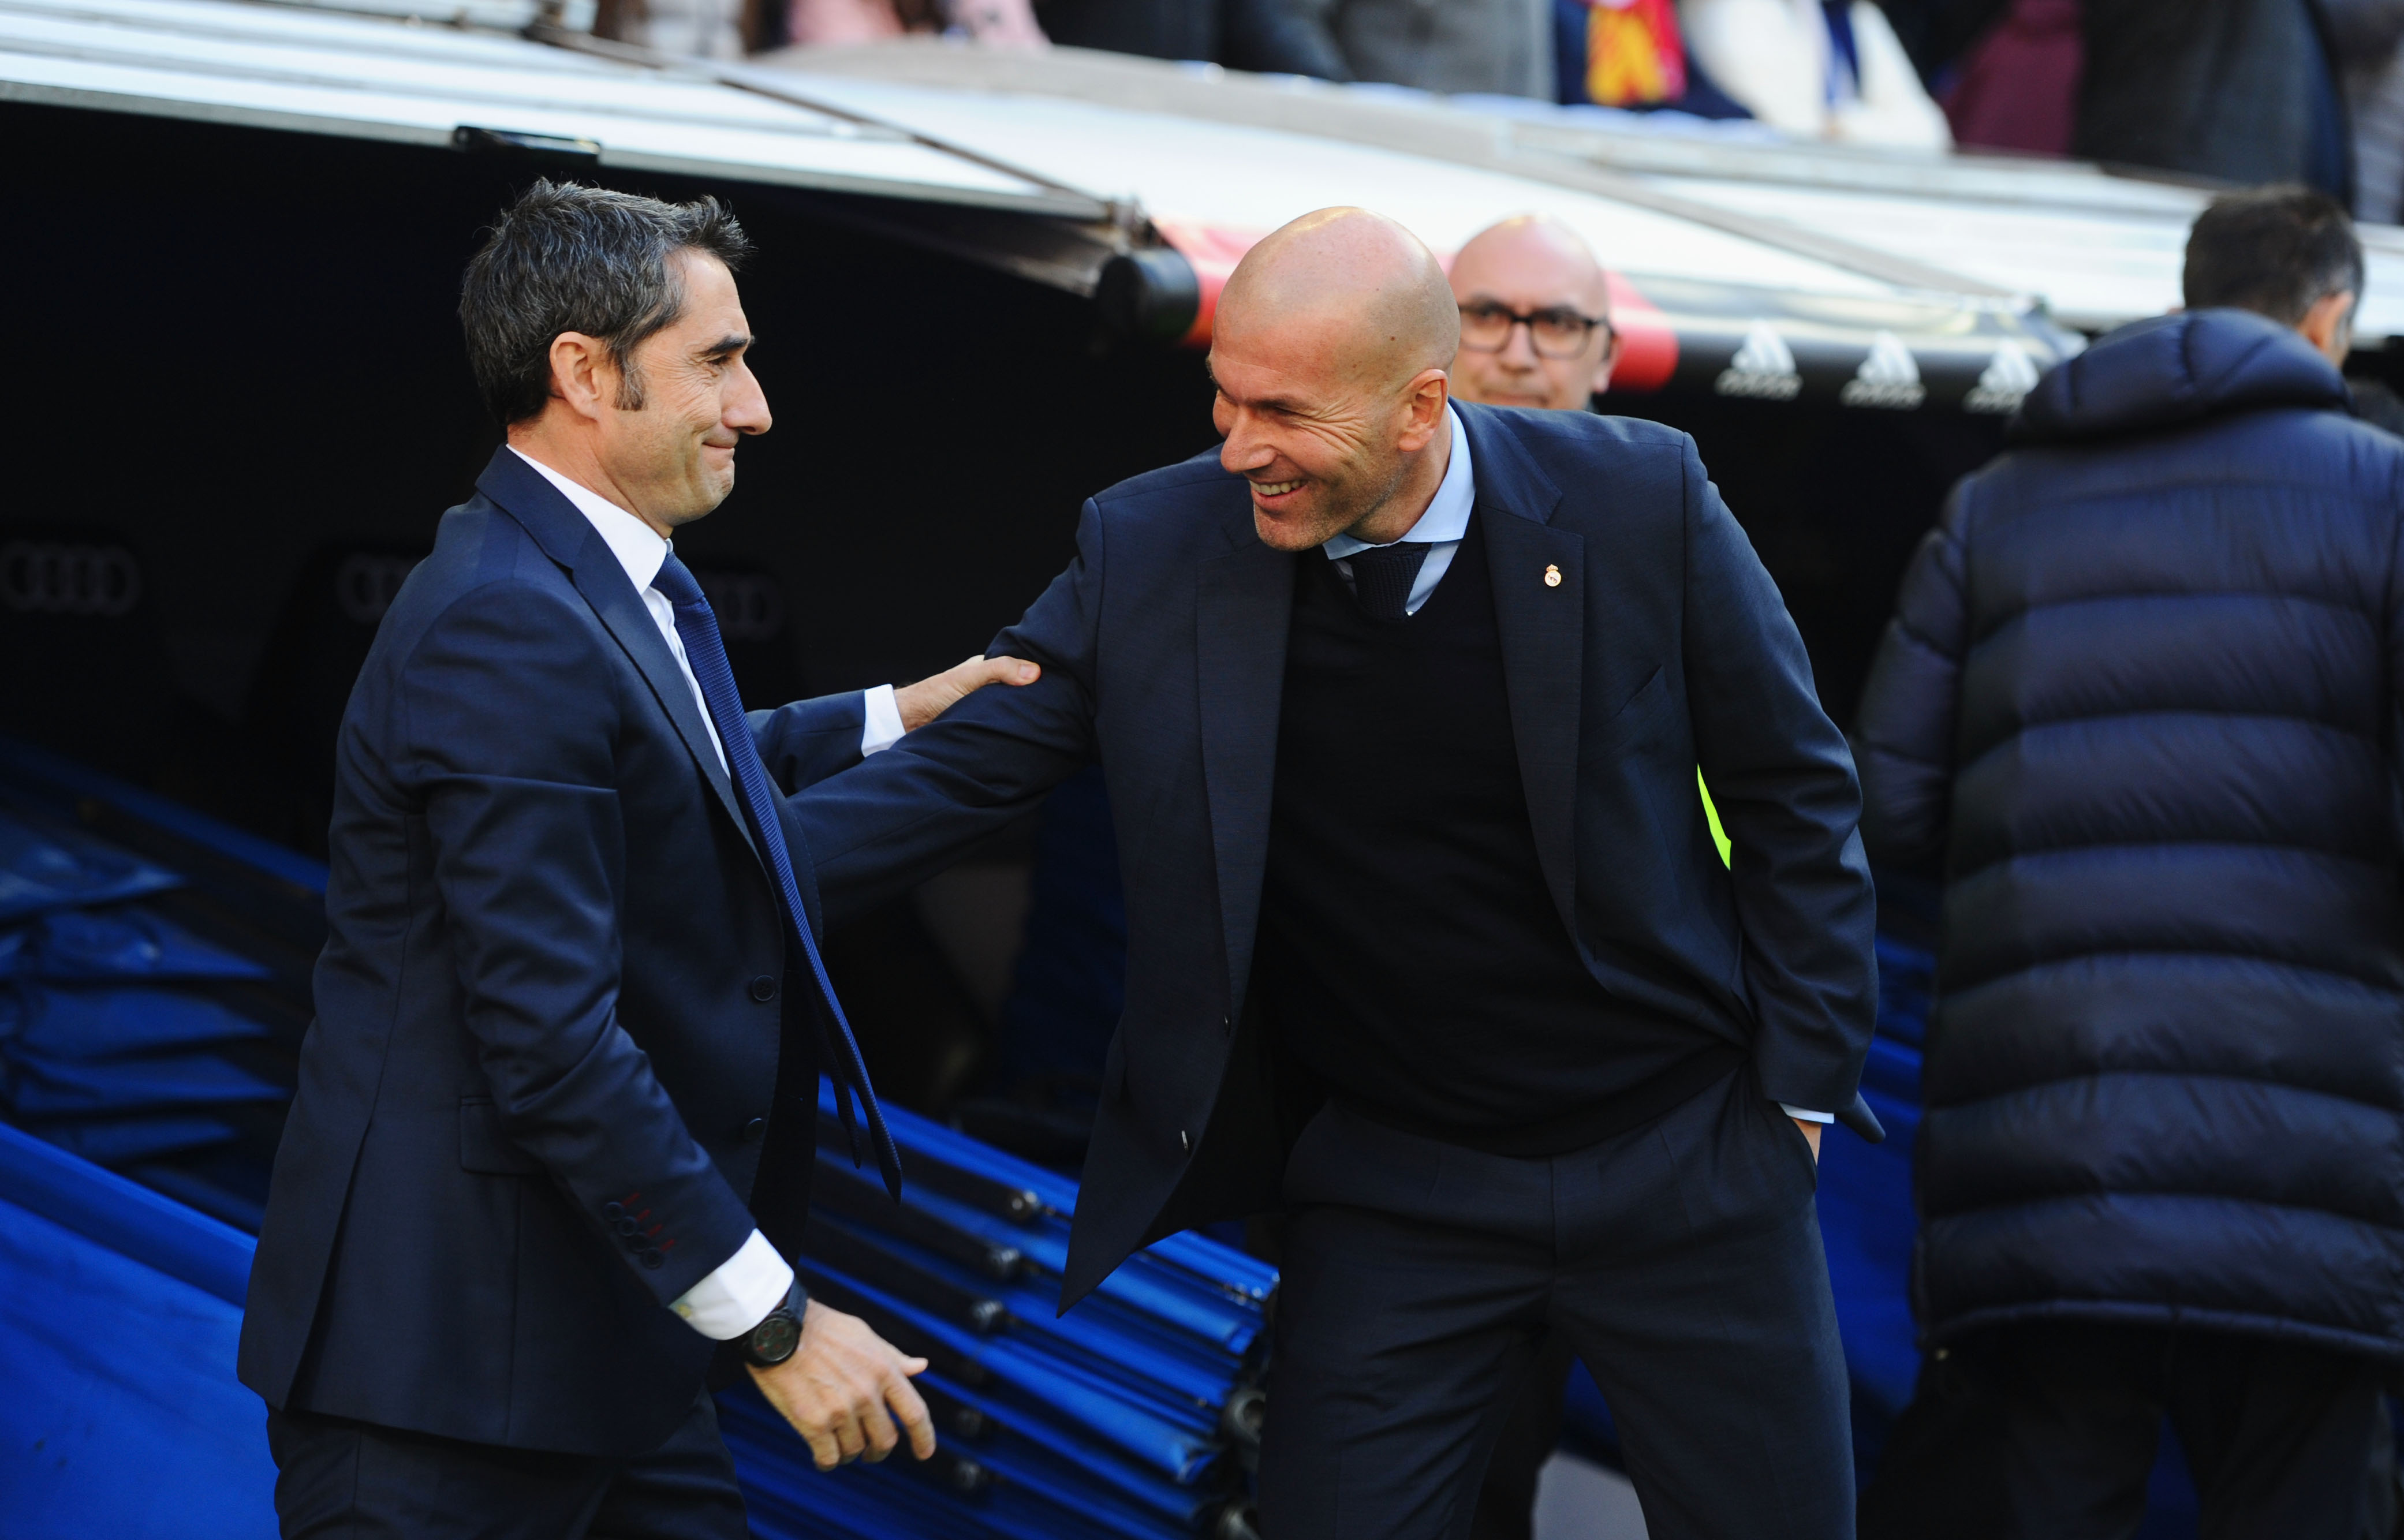 MADRID, SPAIN - DECEMBER 23:  Zinedine Zidane, Manager of Real Madrid greets Ernesto Valverde, coach of Barcelona prior to the La Liga match between Real Madrid and Barcelona at Estadio Santiago Bernabeu on December 23, 2017 in Madrid, Spain.  (Photo by Denis Doyle/Getty Images)